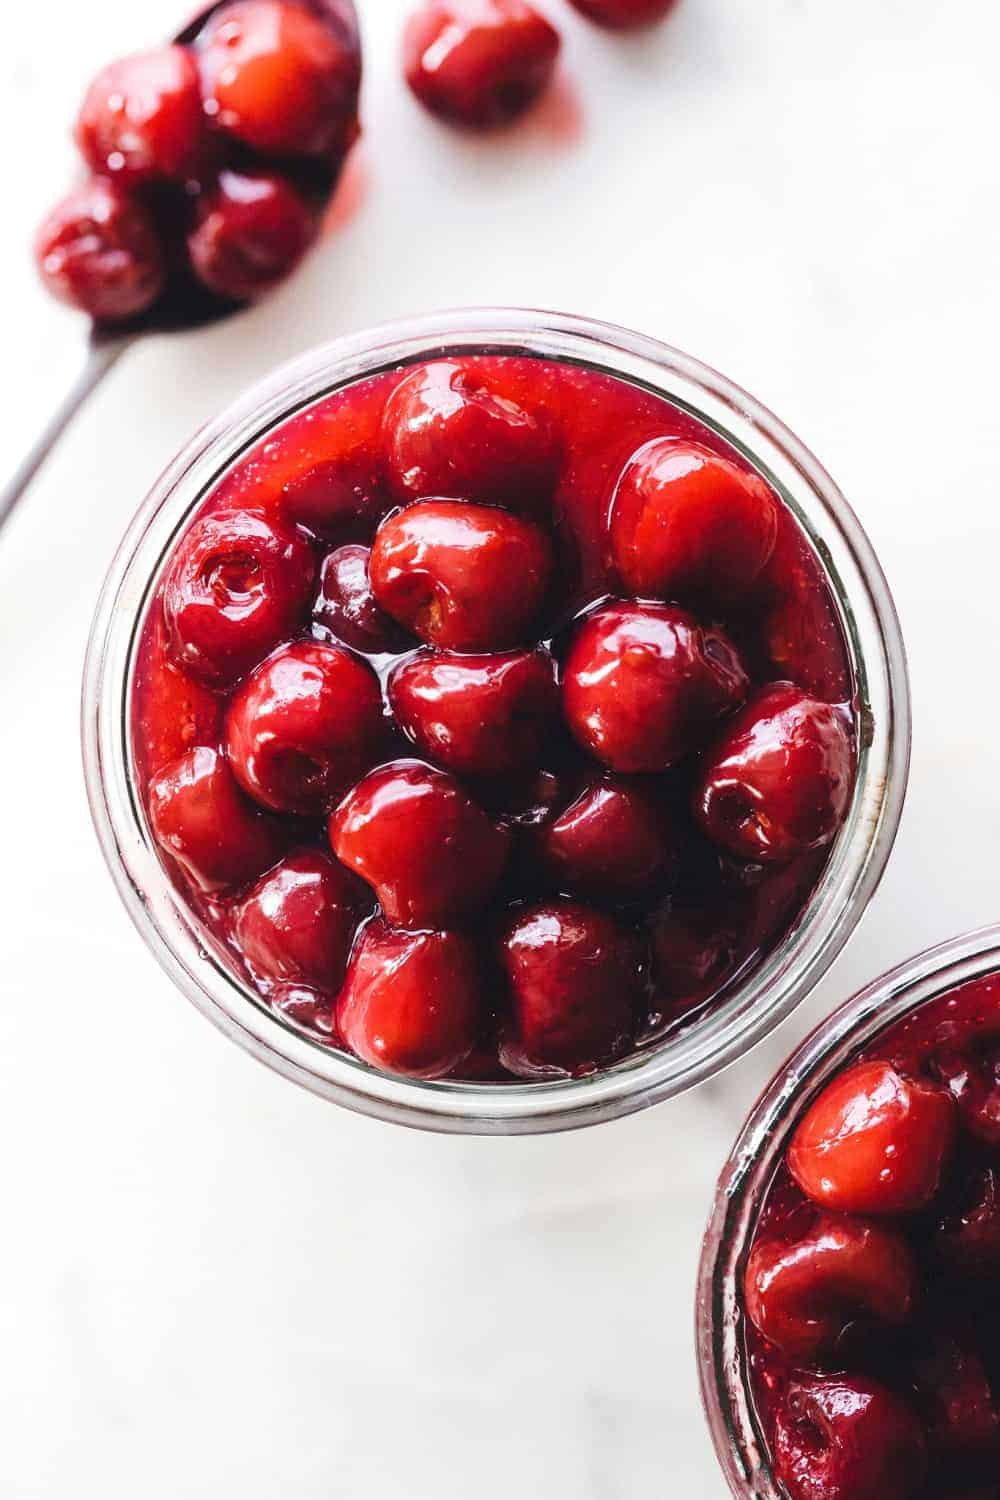 Homemade Cherry Pie Filling can be made quickly and easily with fresh or frozen cherries.